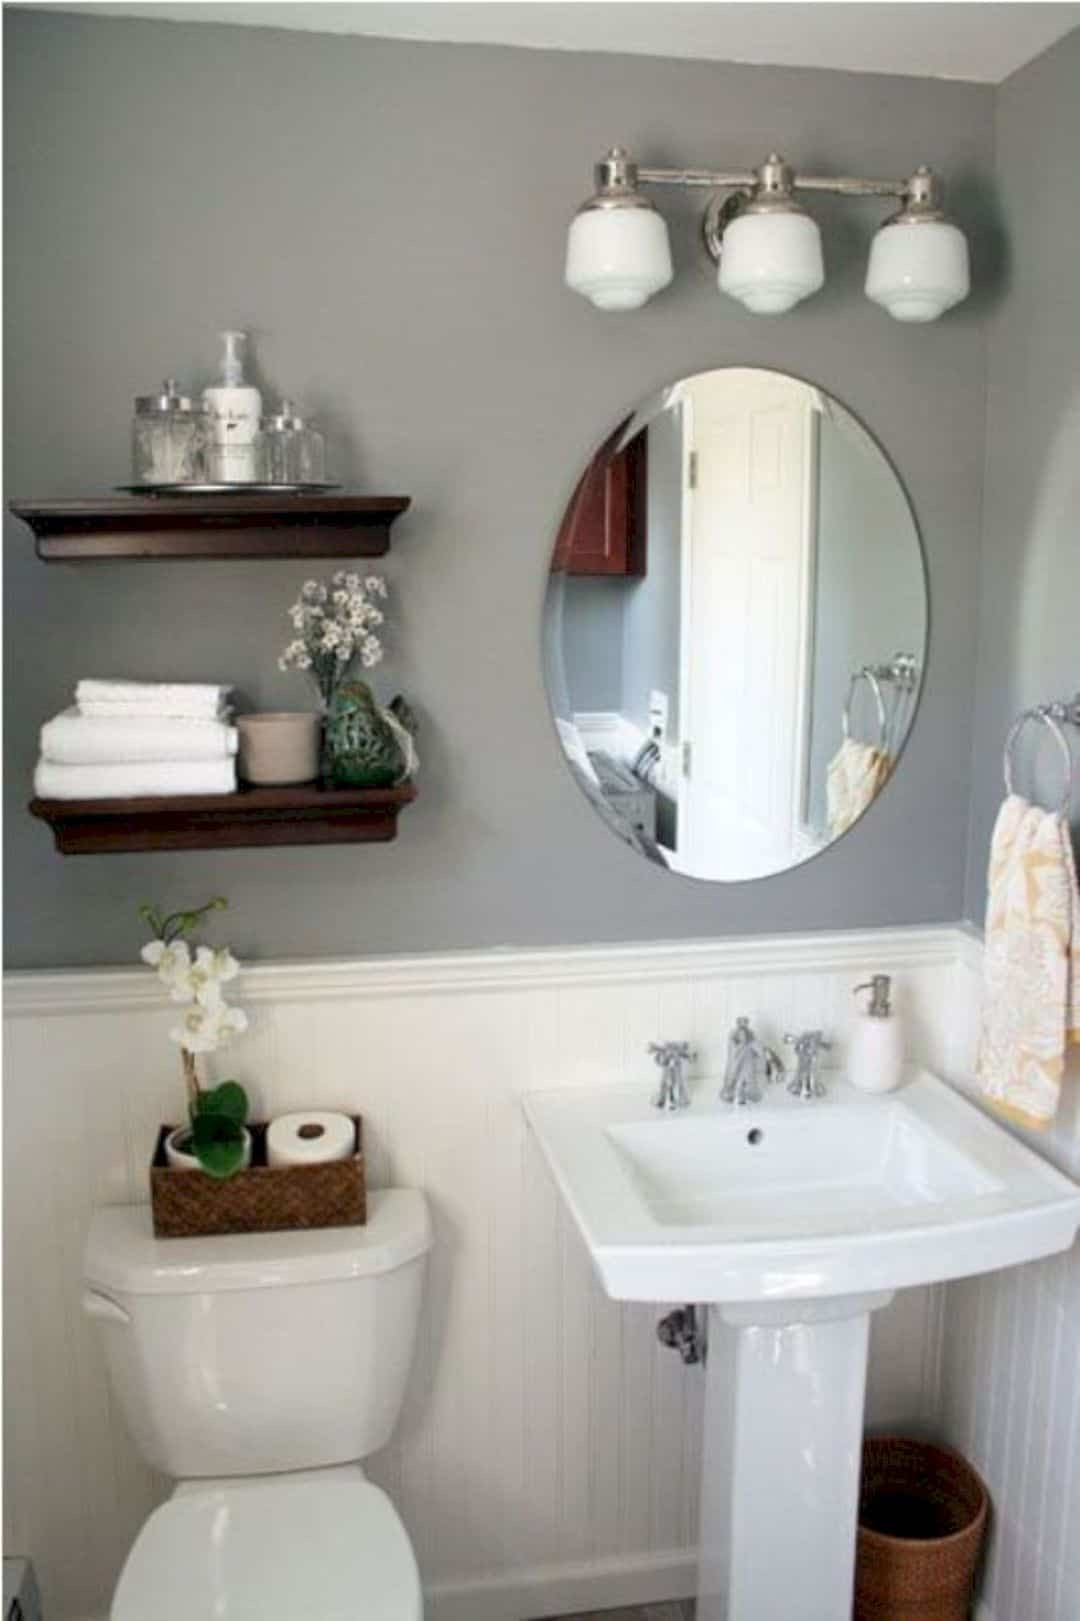 Bathroom Wall Decorating Ideas
 17 Awesome Small Bathroom Decorating Ideas